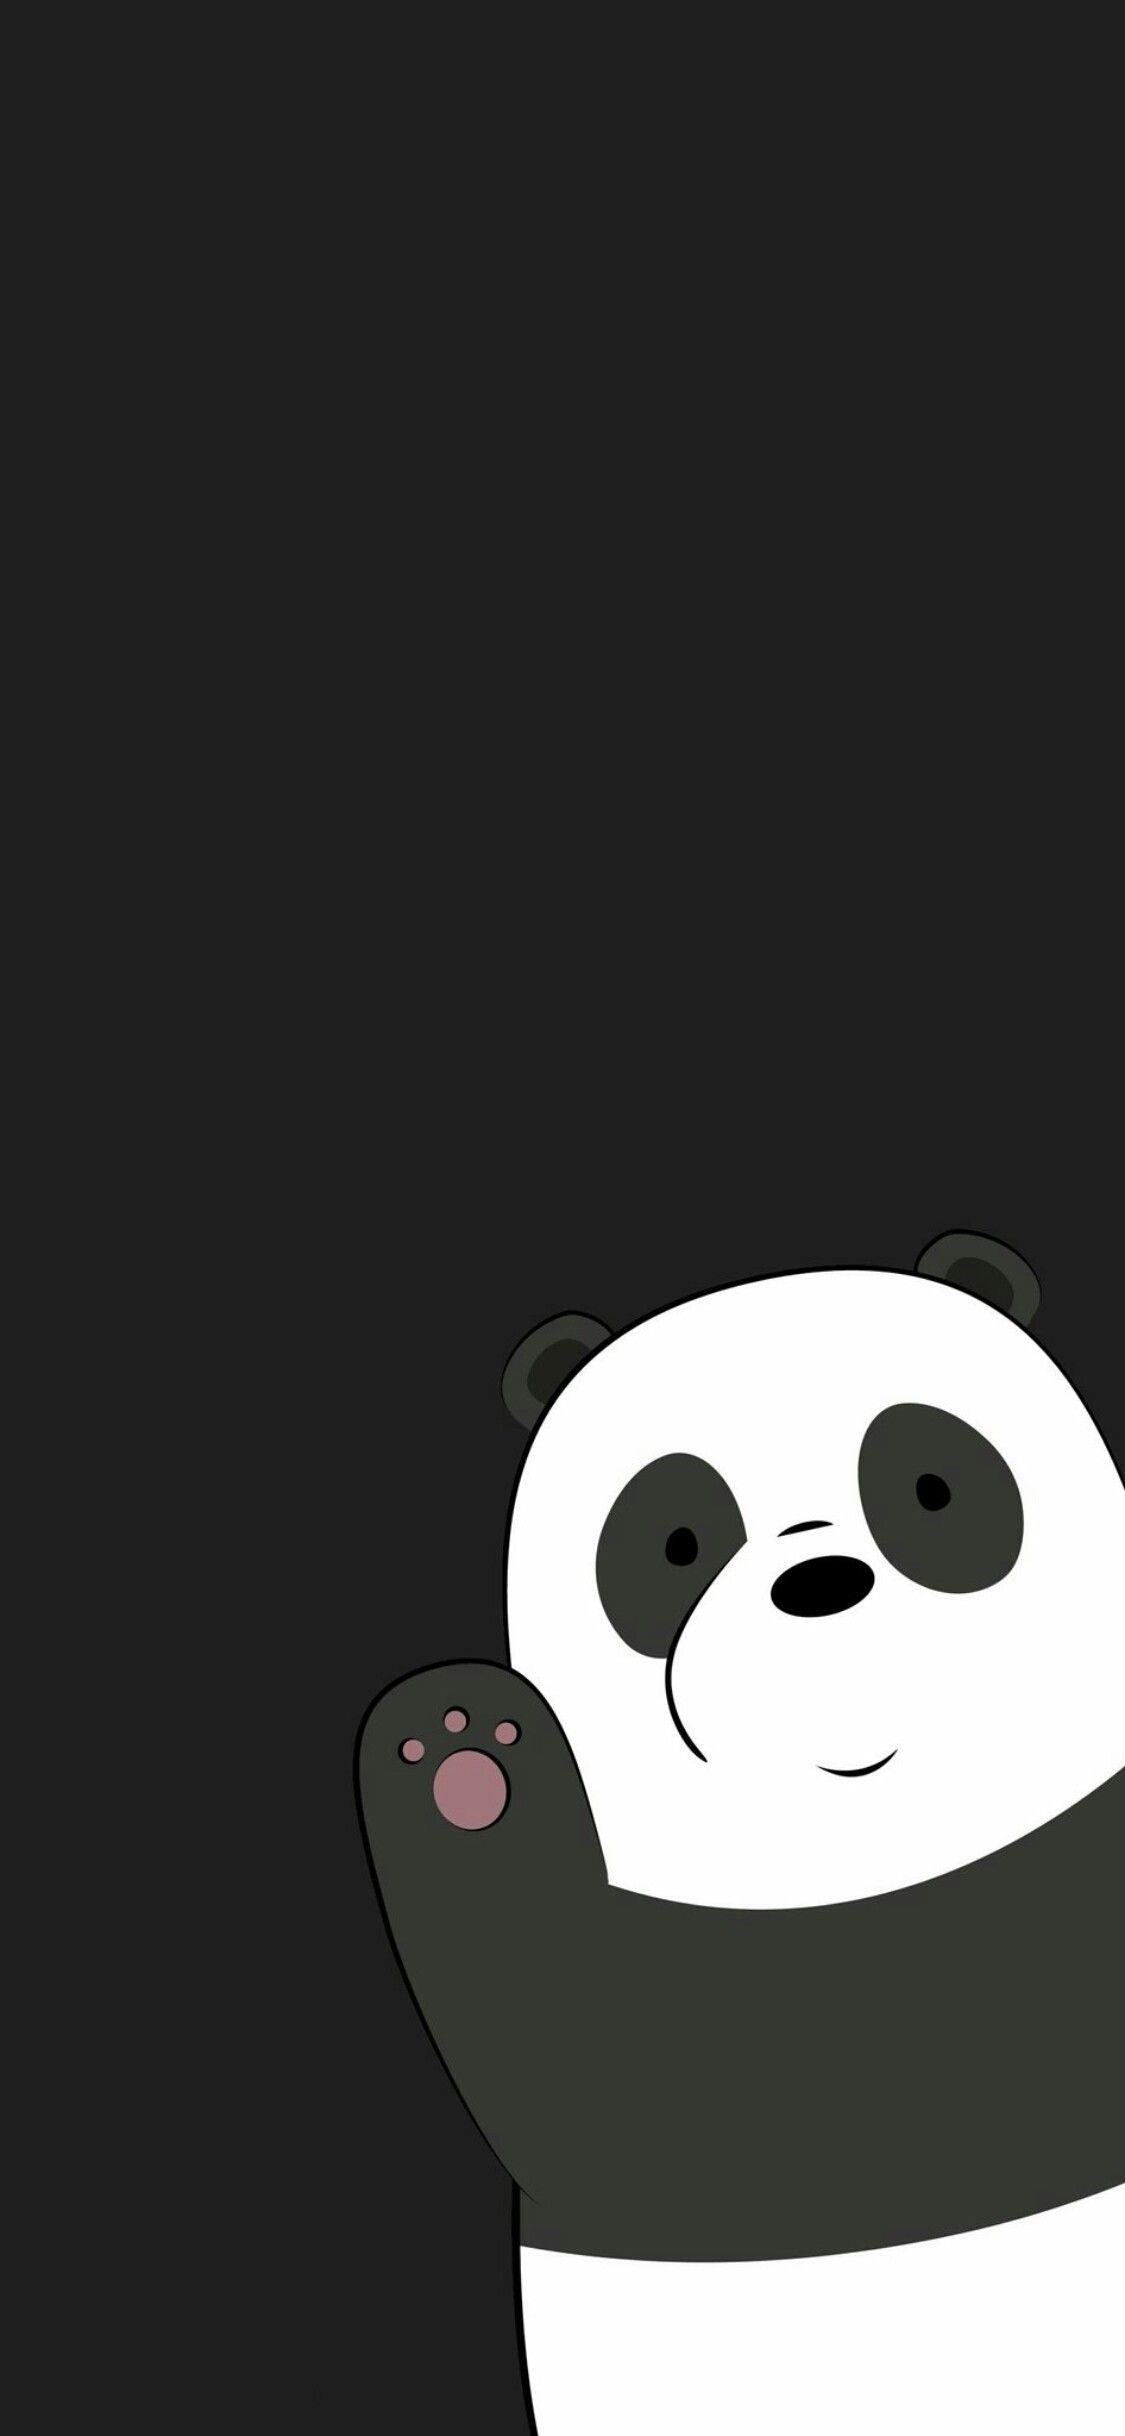 We Bare Bears 4K Wallpapers - Top Free We Bare Bears 4K Backgrounds ...